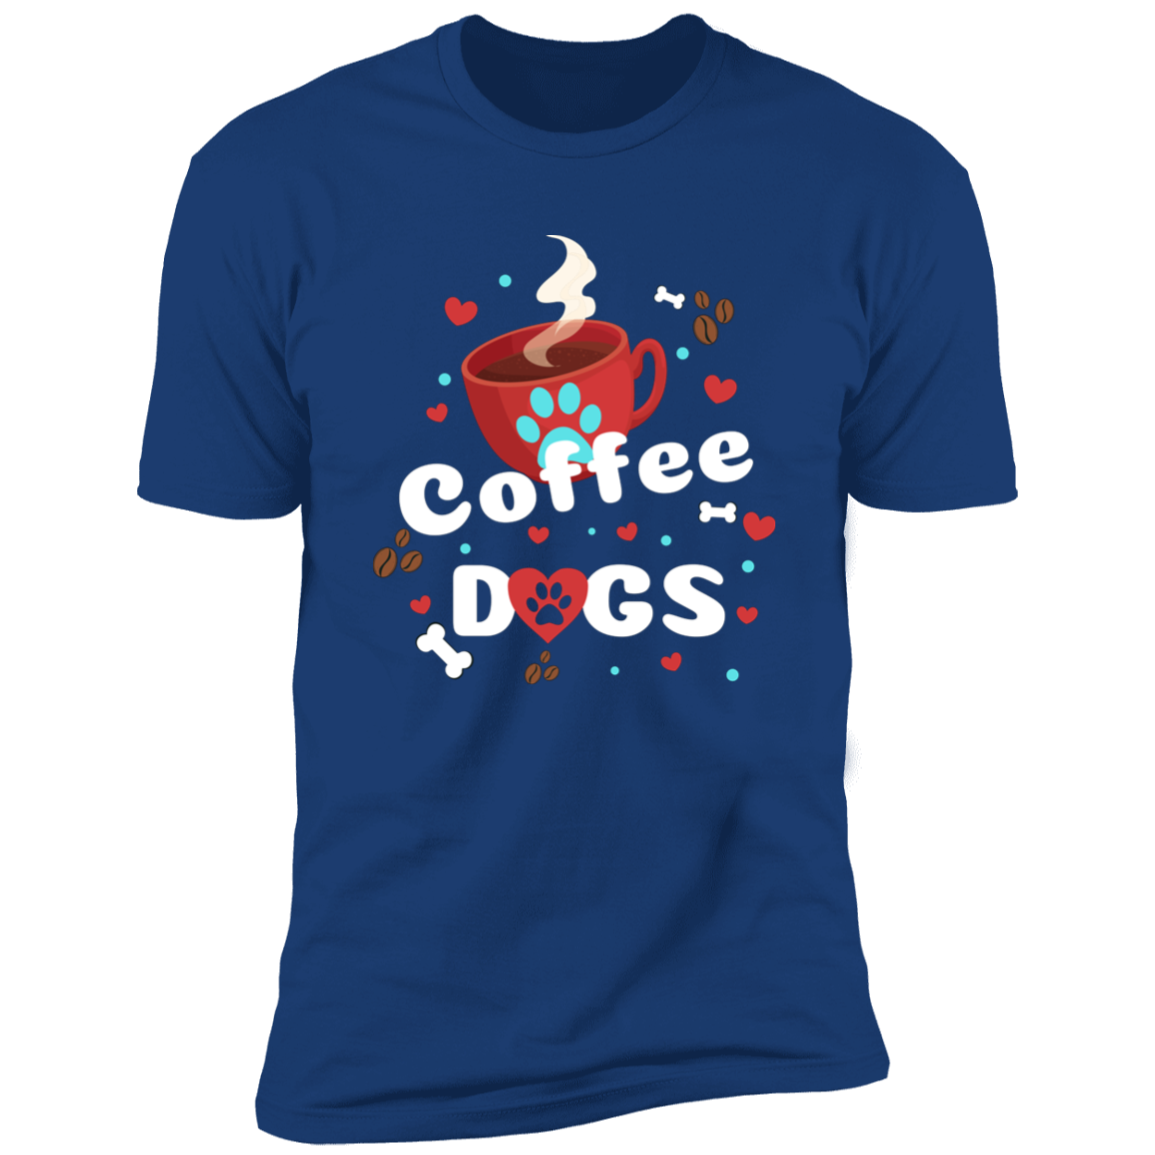 Coffee Dogs T-shirt, Dog Shirt for humans, in royal blue